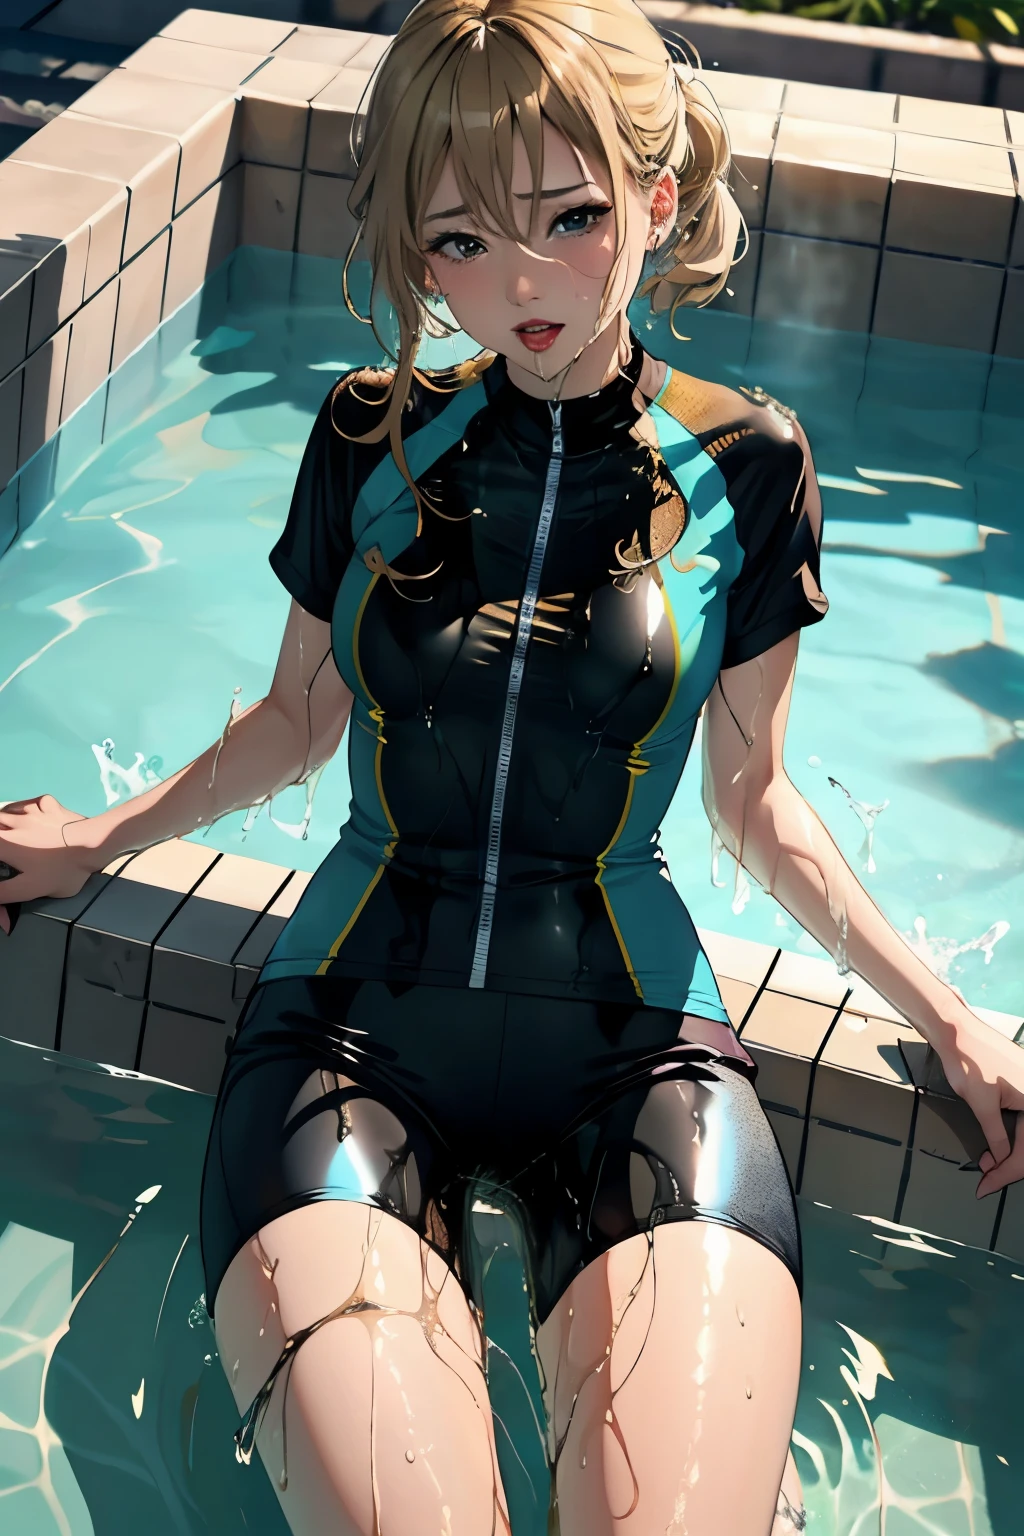 best quality, high quality, highres, beautiful women, tanned gyaru, blonde hair, high detail, good lighting, lewd, hentai, (((shiny wet spandex short-sleeved cycling suit))), ((wet clothes)), ((soaking wet)), ((wetlook)), (bare thighs), (((wetting herself))), (((peeing herself))), (((peeing self))), (pee streaming down legs), peeing stain, (puddle), (thick thighs), nice long legs, lipstick, detailed face, pretty face, seductive face, aroused, sexually excited, ((in water bathing))